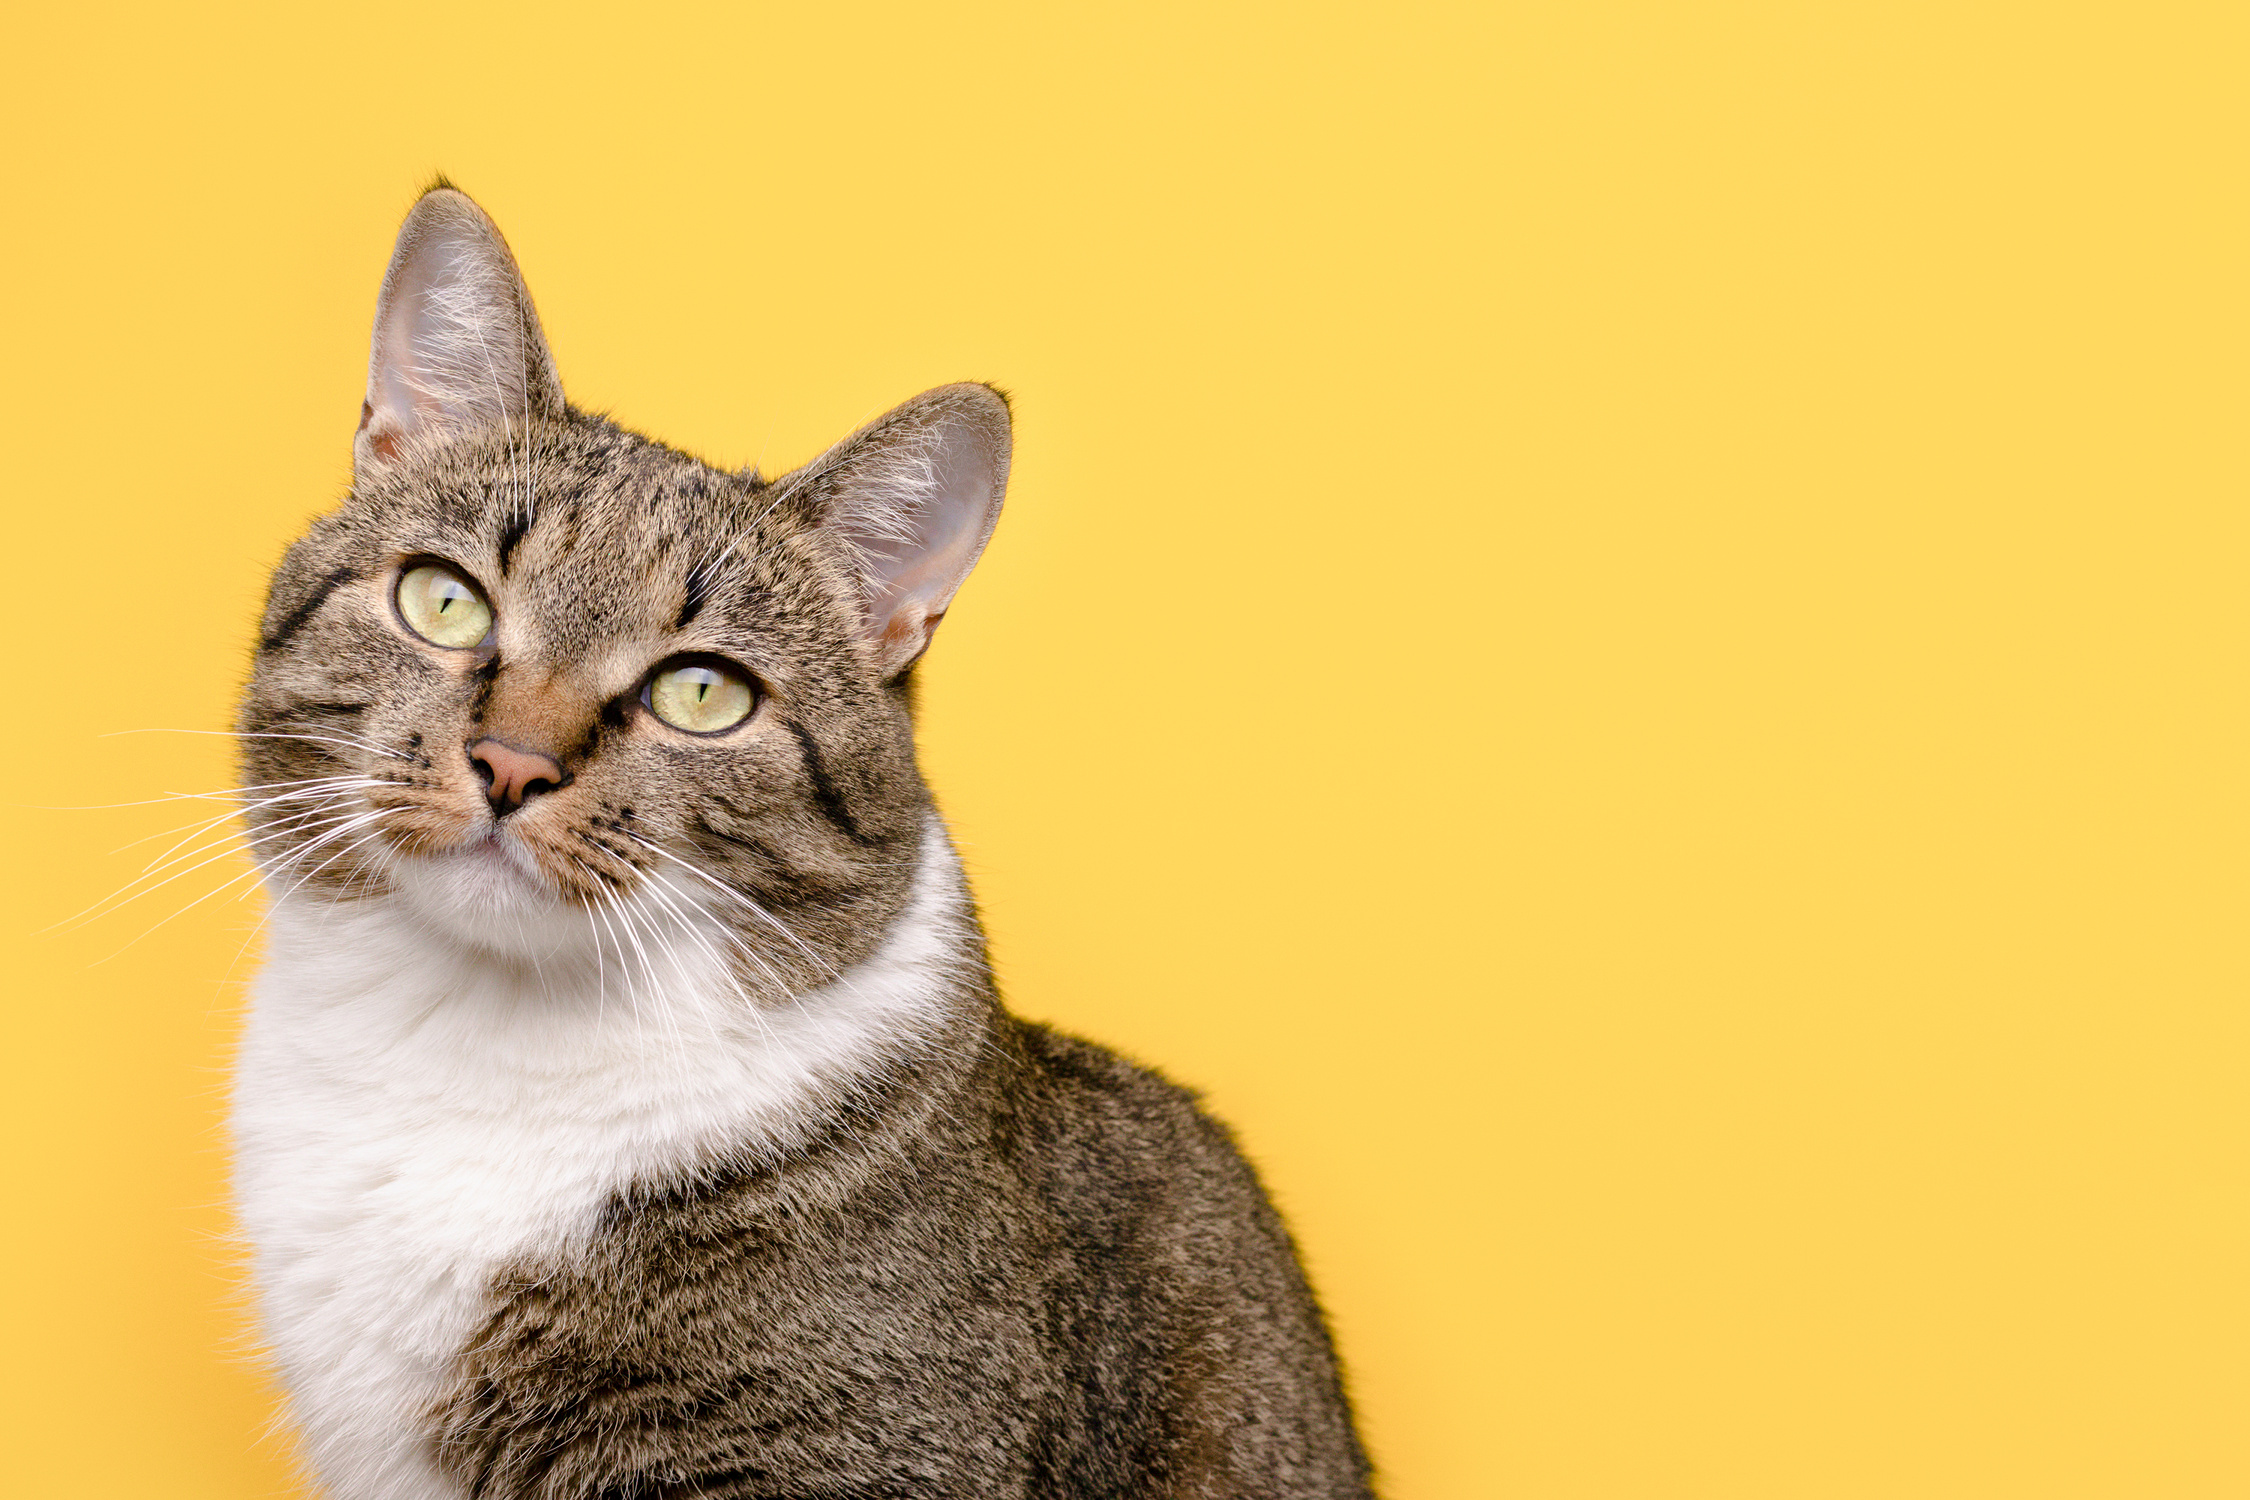 Cat on Yellow Background